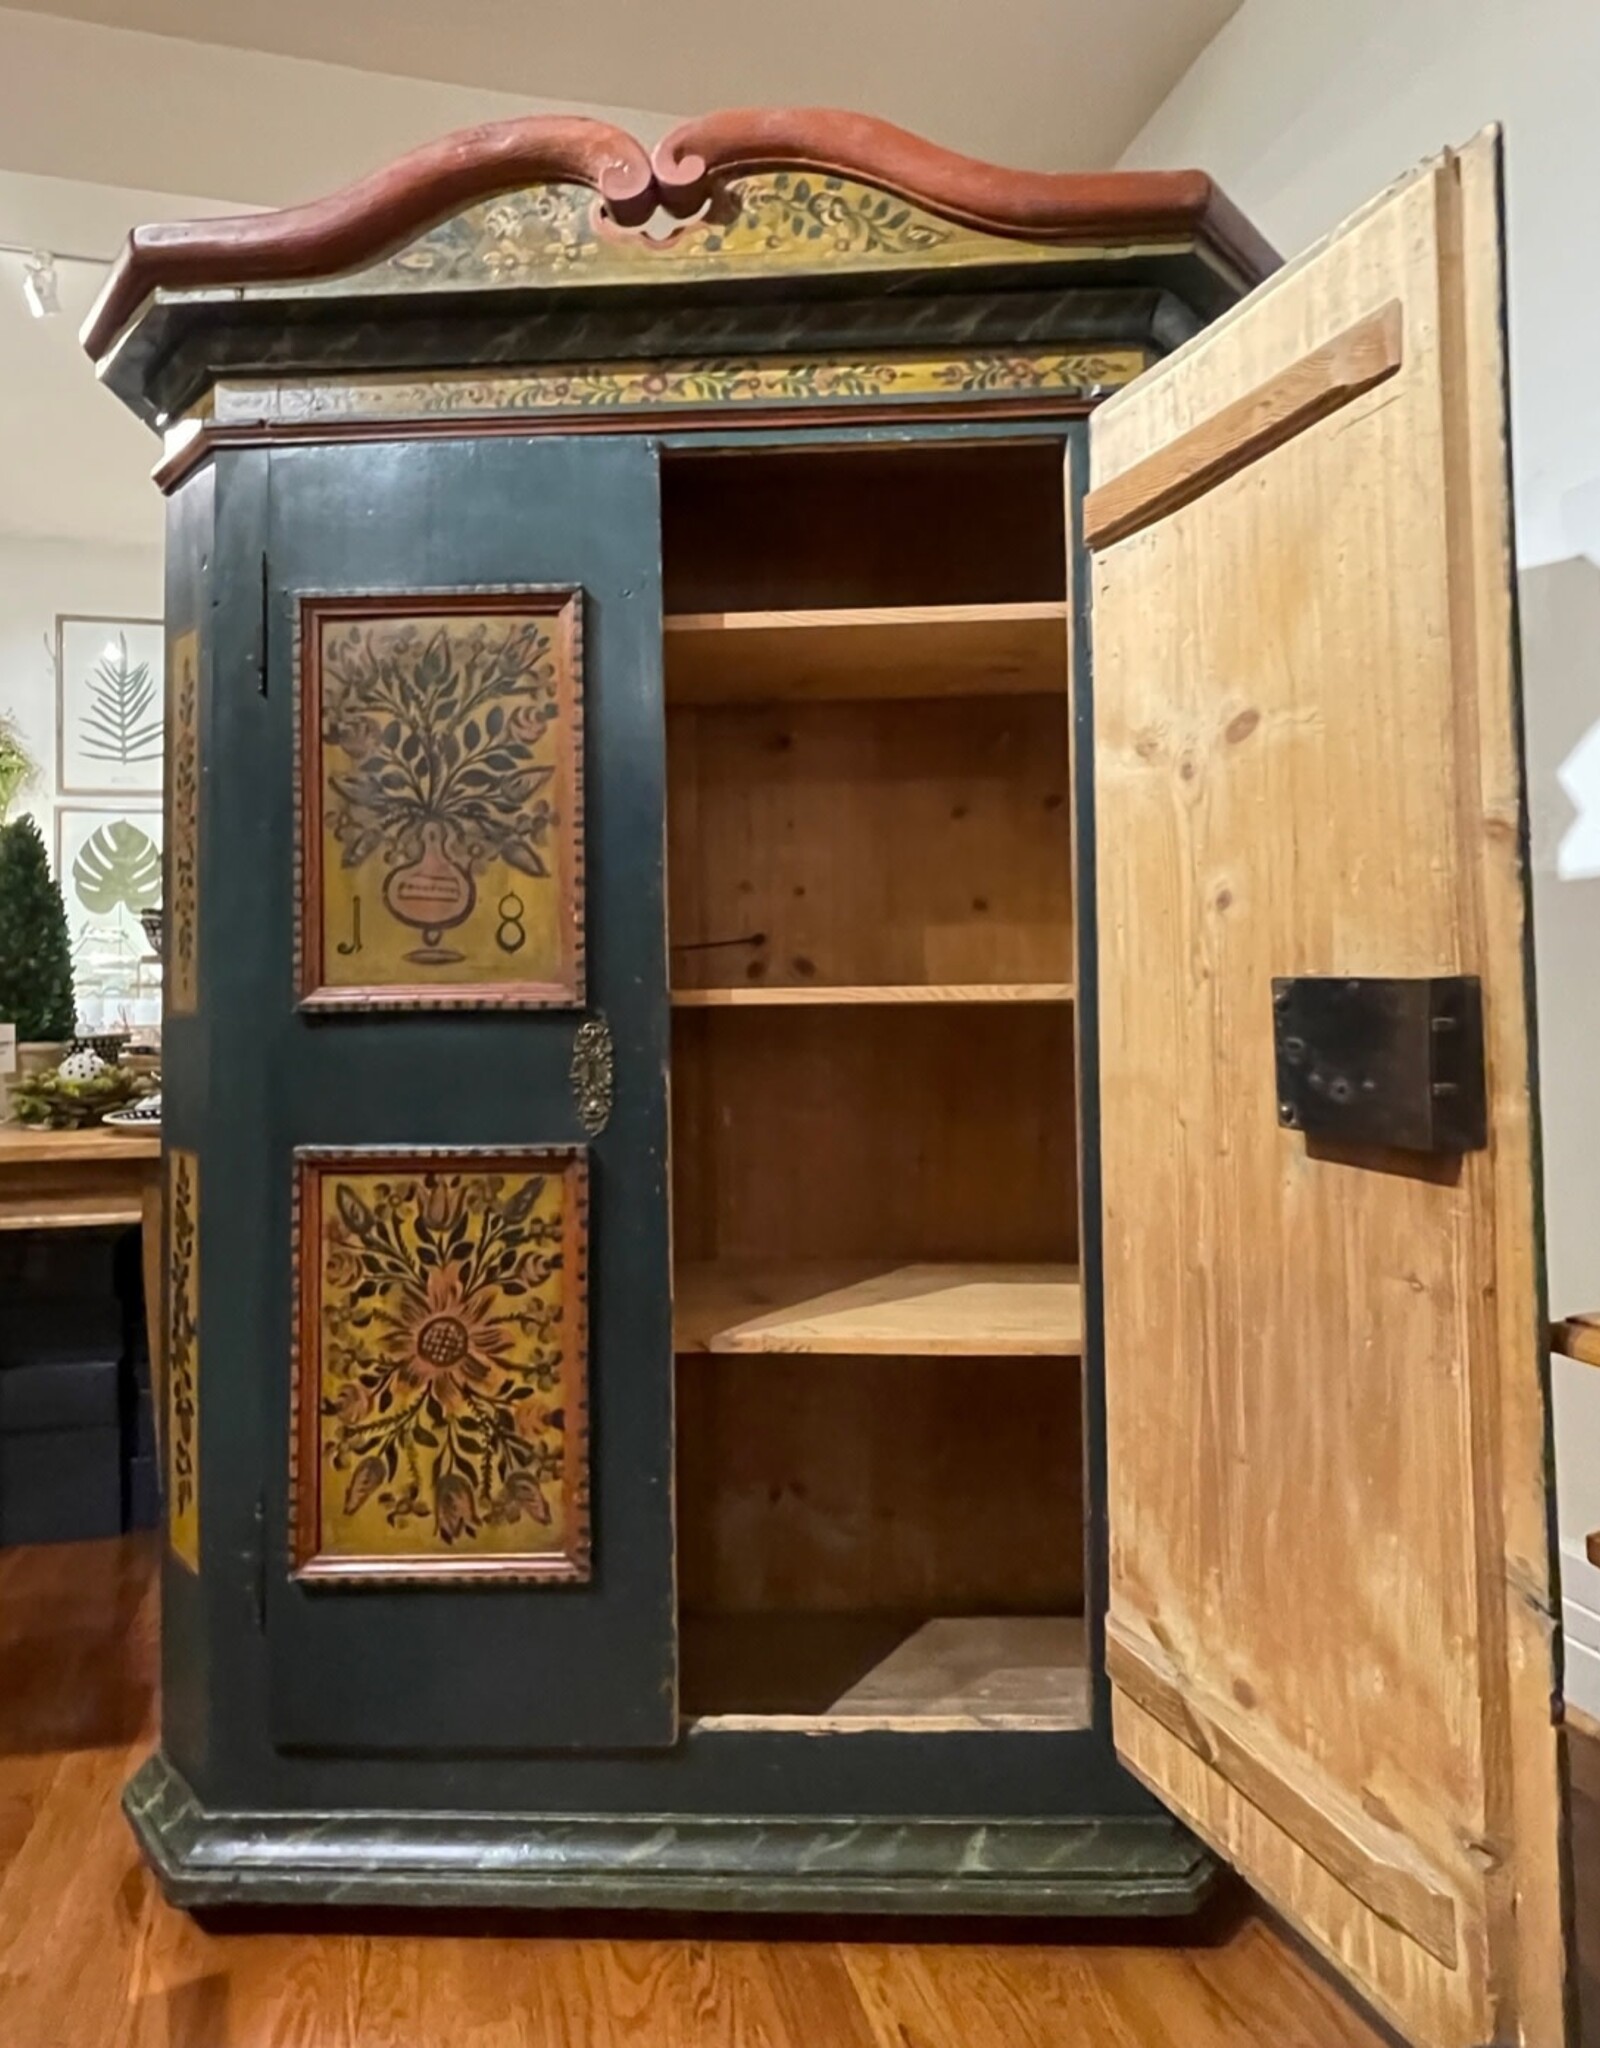 Armoire - Painted With Floral Scenes. German Original.